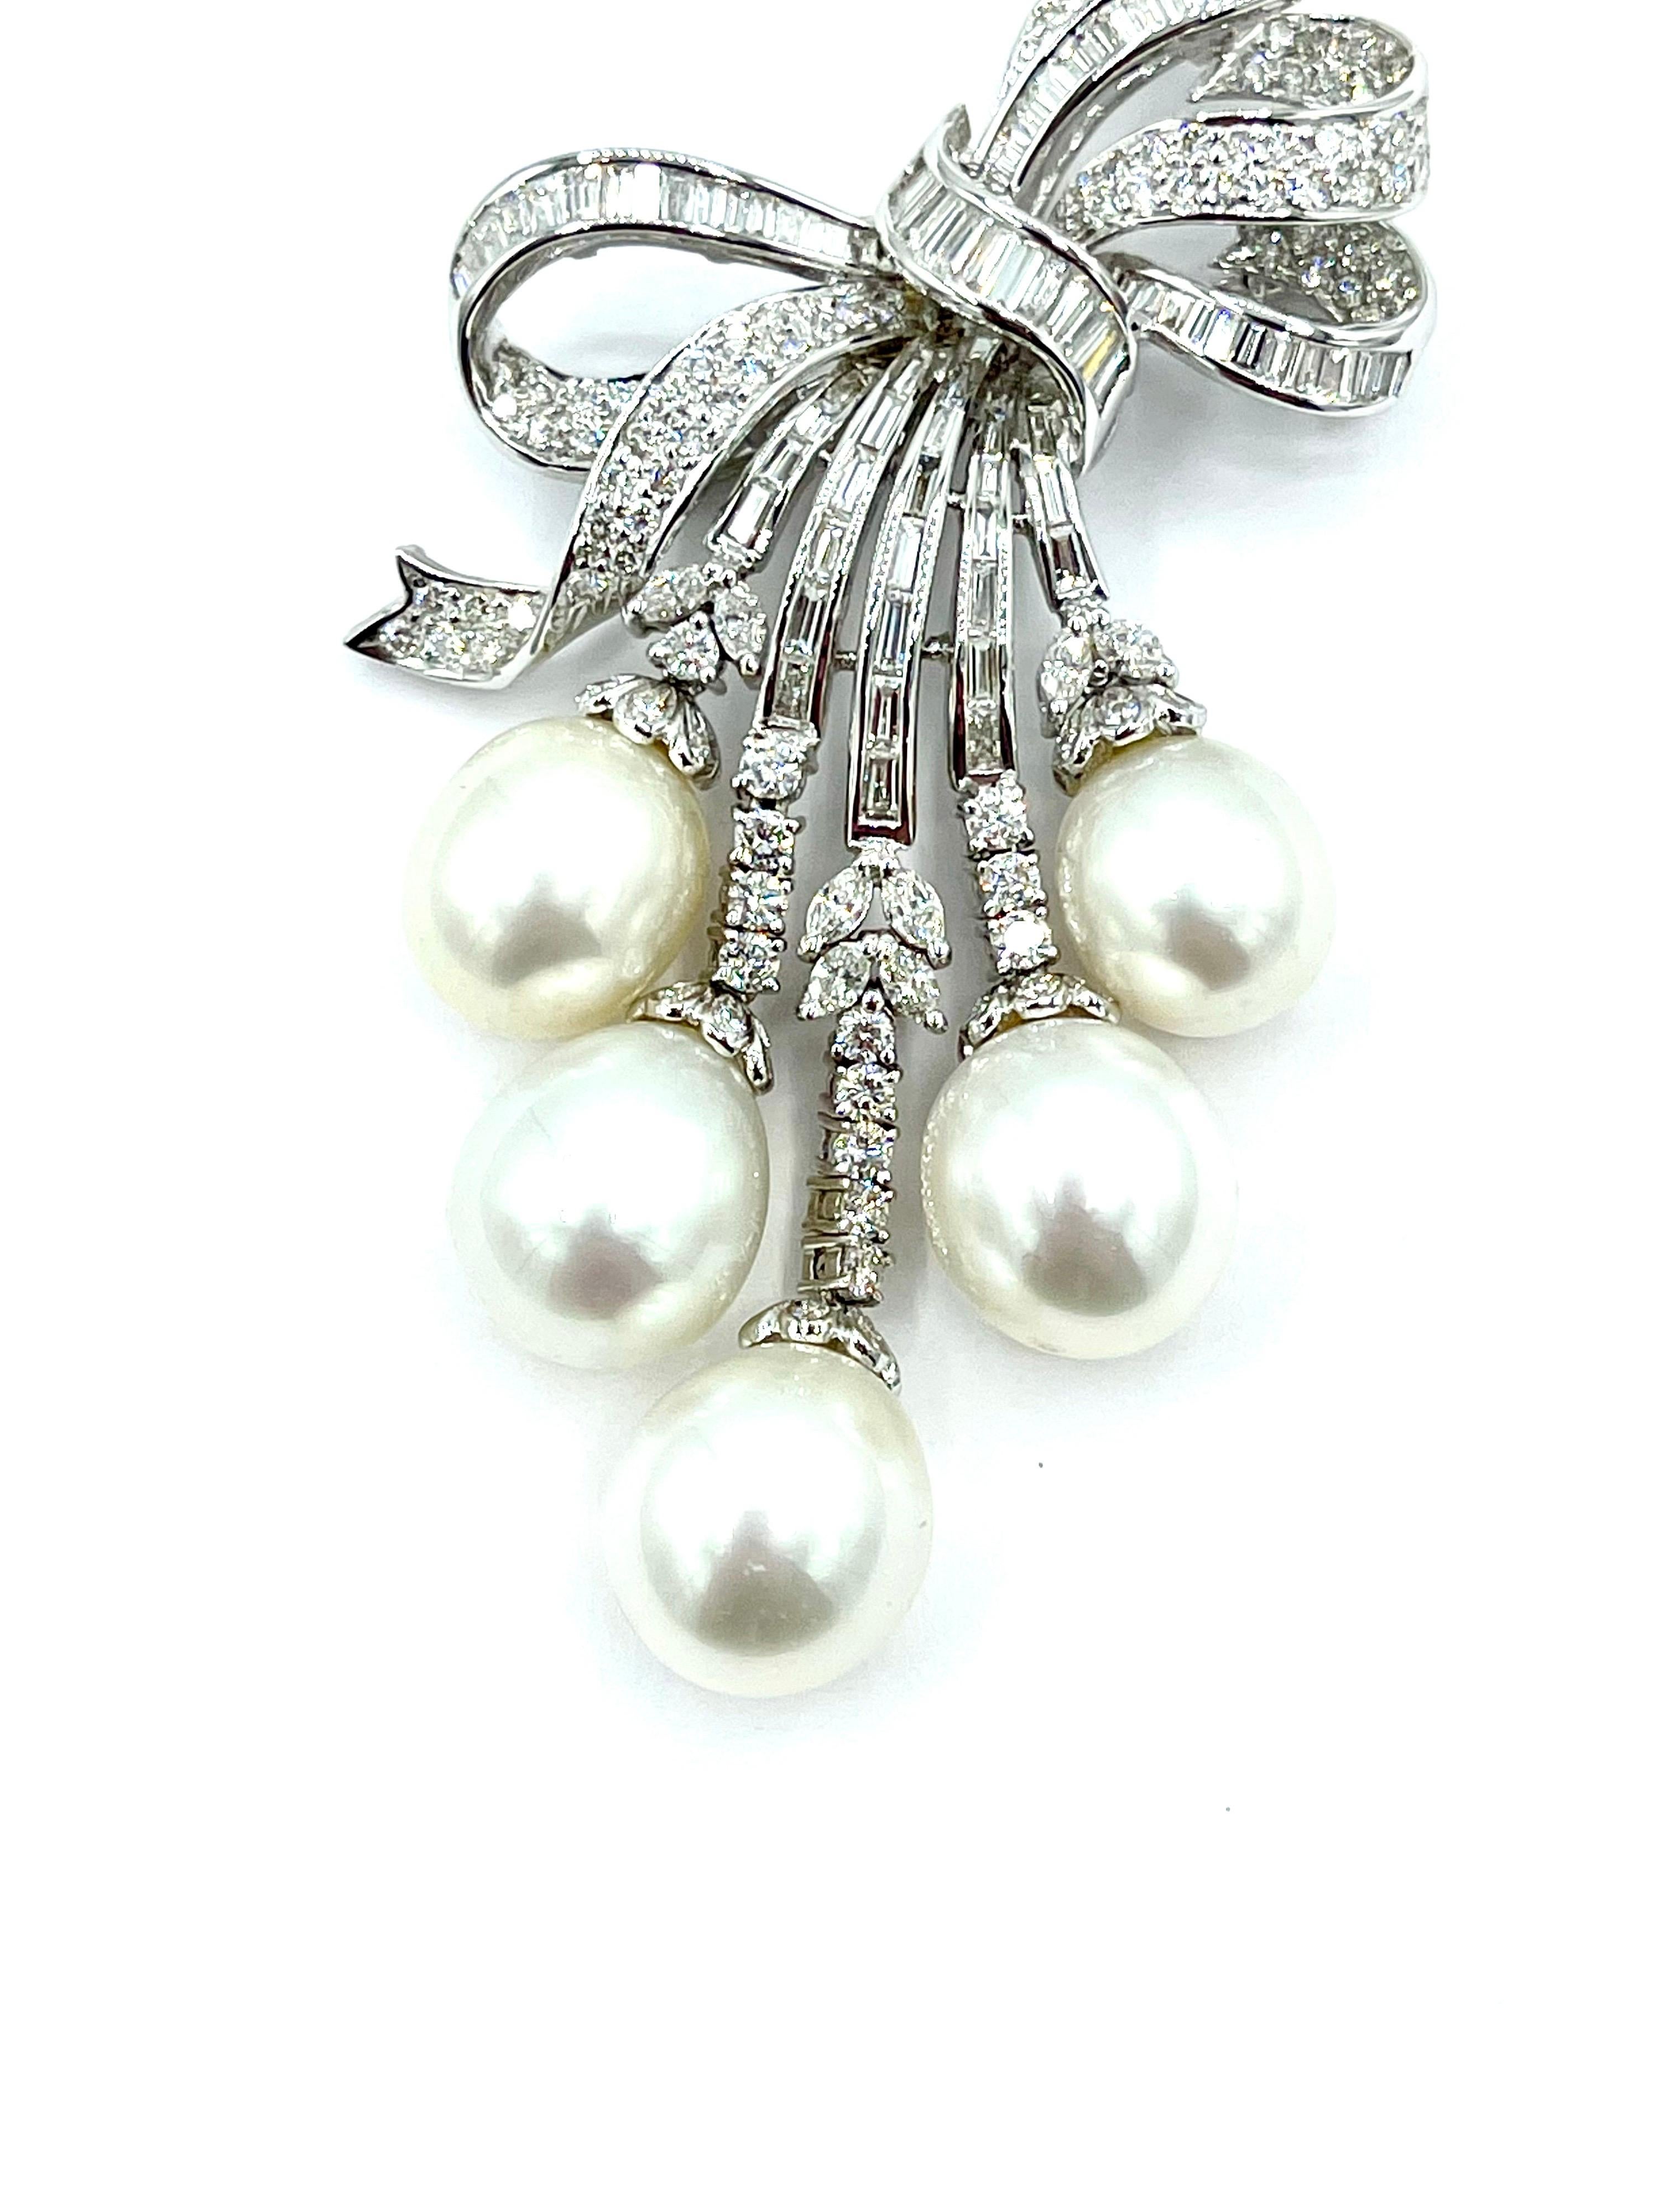 A gorgeous pendant and brooch literally dripping with Diamonds and Pearls!  There are five South Sea Pearls graduating in size from 11.90 to 13.80mm,  suspended from extensions of the main bow, all set with round brilliant, marquise, and baguette